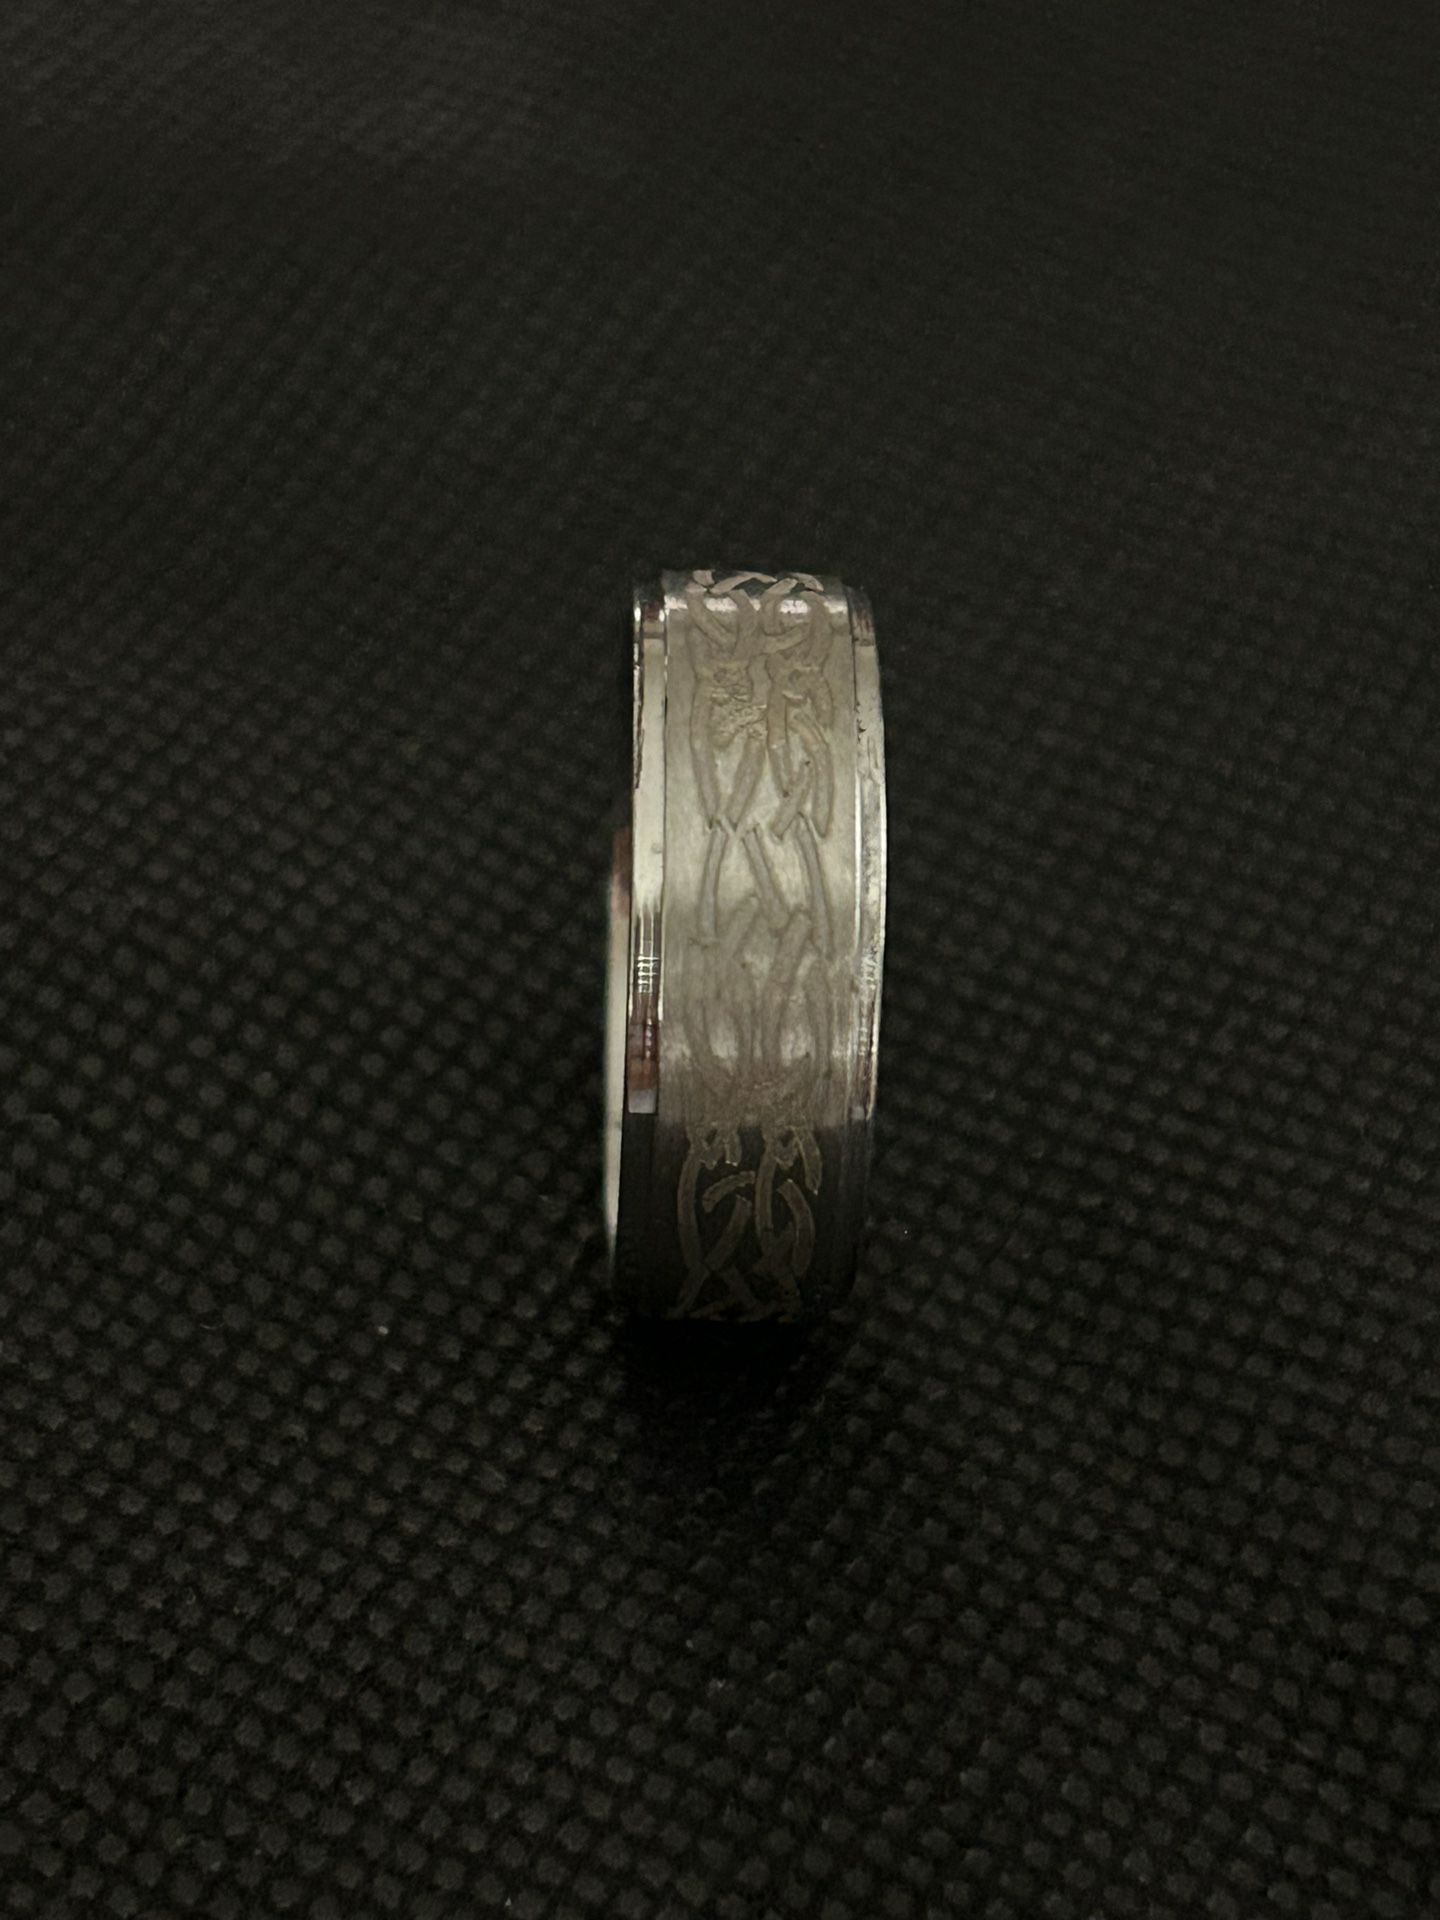 Mens Ring Silver Tone Band W/Tribal Design NEW